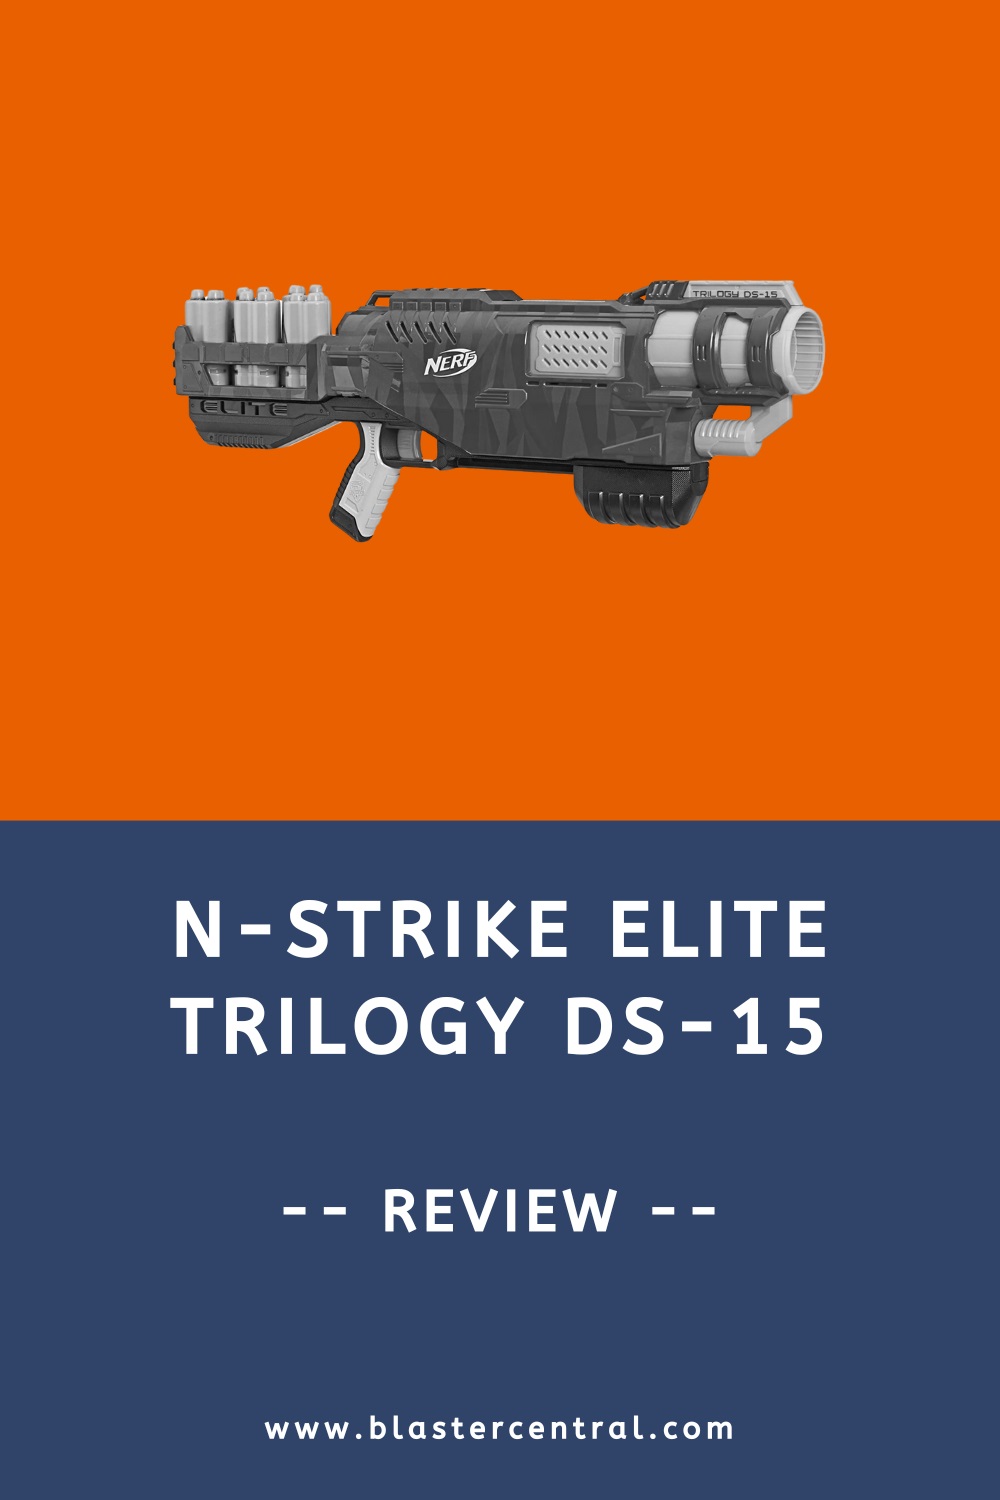 Review of the Nerf N-Strike Elite Trilogy DS-15